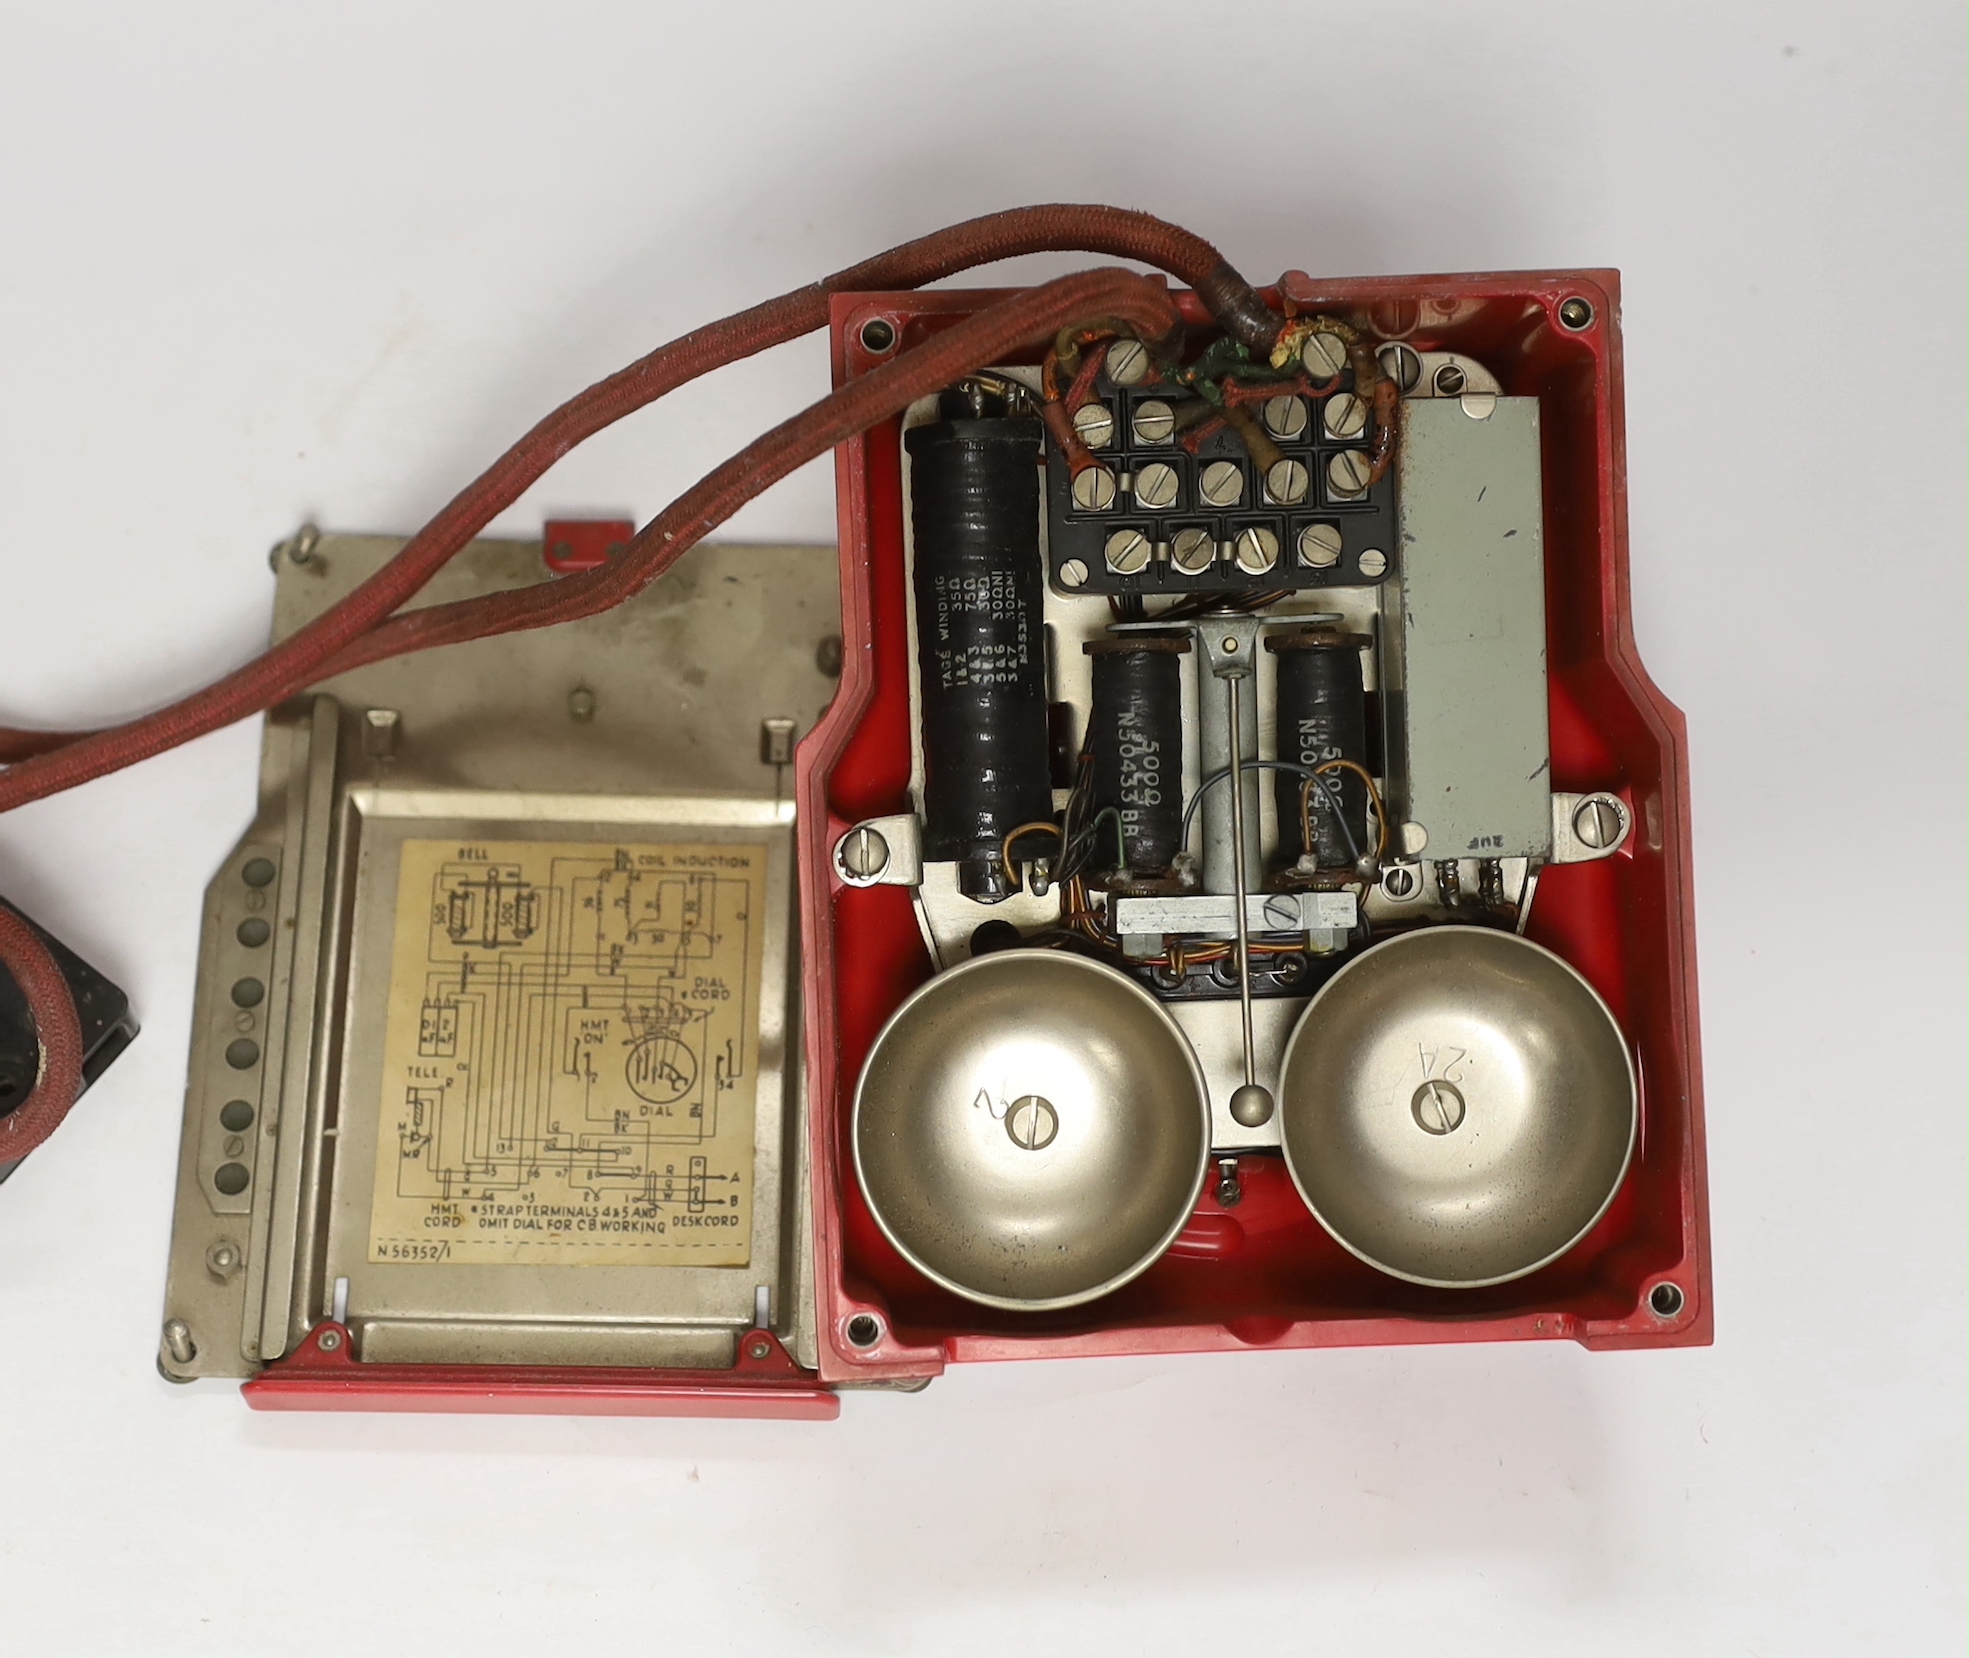 A red 1950s Ericsson Telephones Ltd telephone made in the pattern of a GPO 332 series bakelite telephone, serial no.N1002A 23T, understood to be intended for issue in a tropical country